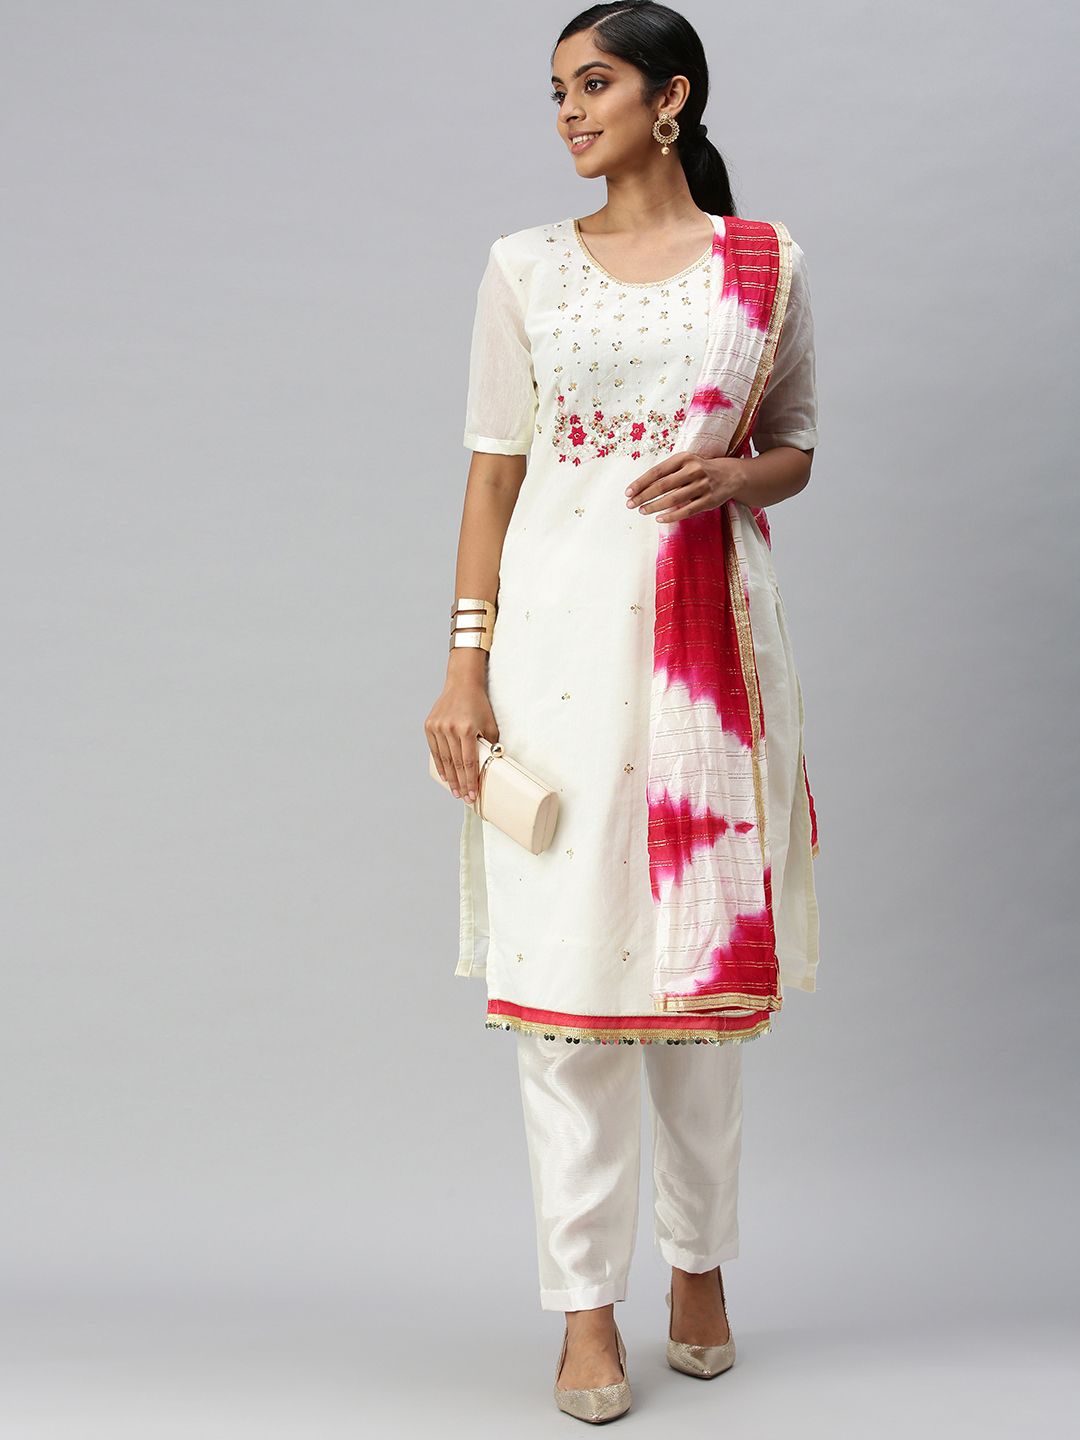 Blissta White & Pink Embellished Unstitched Dress Material Price in India